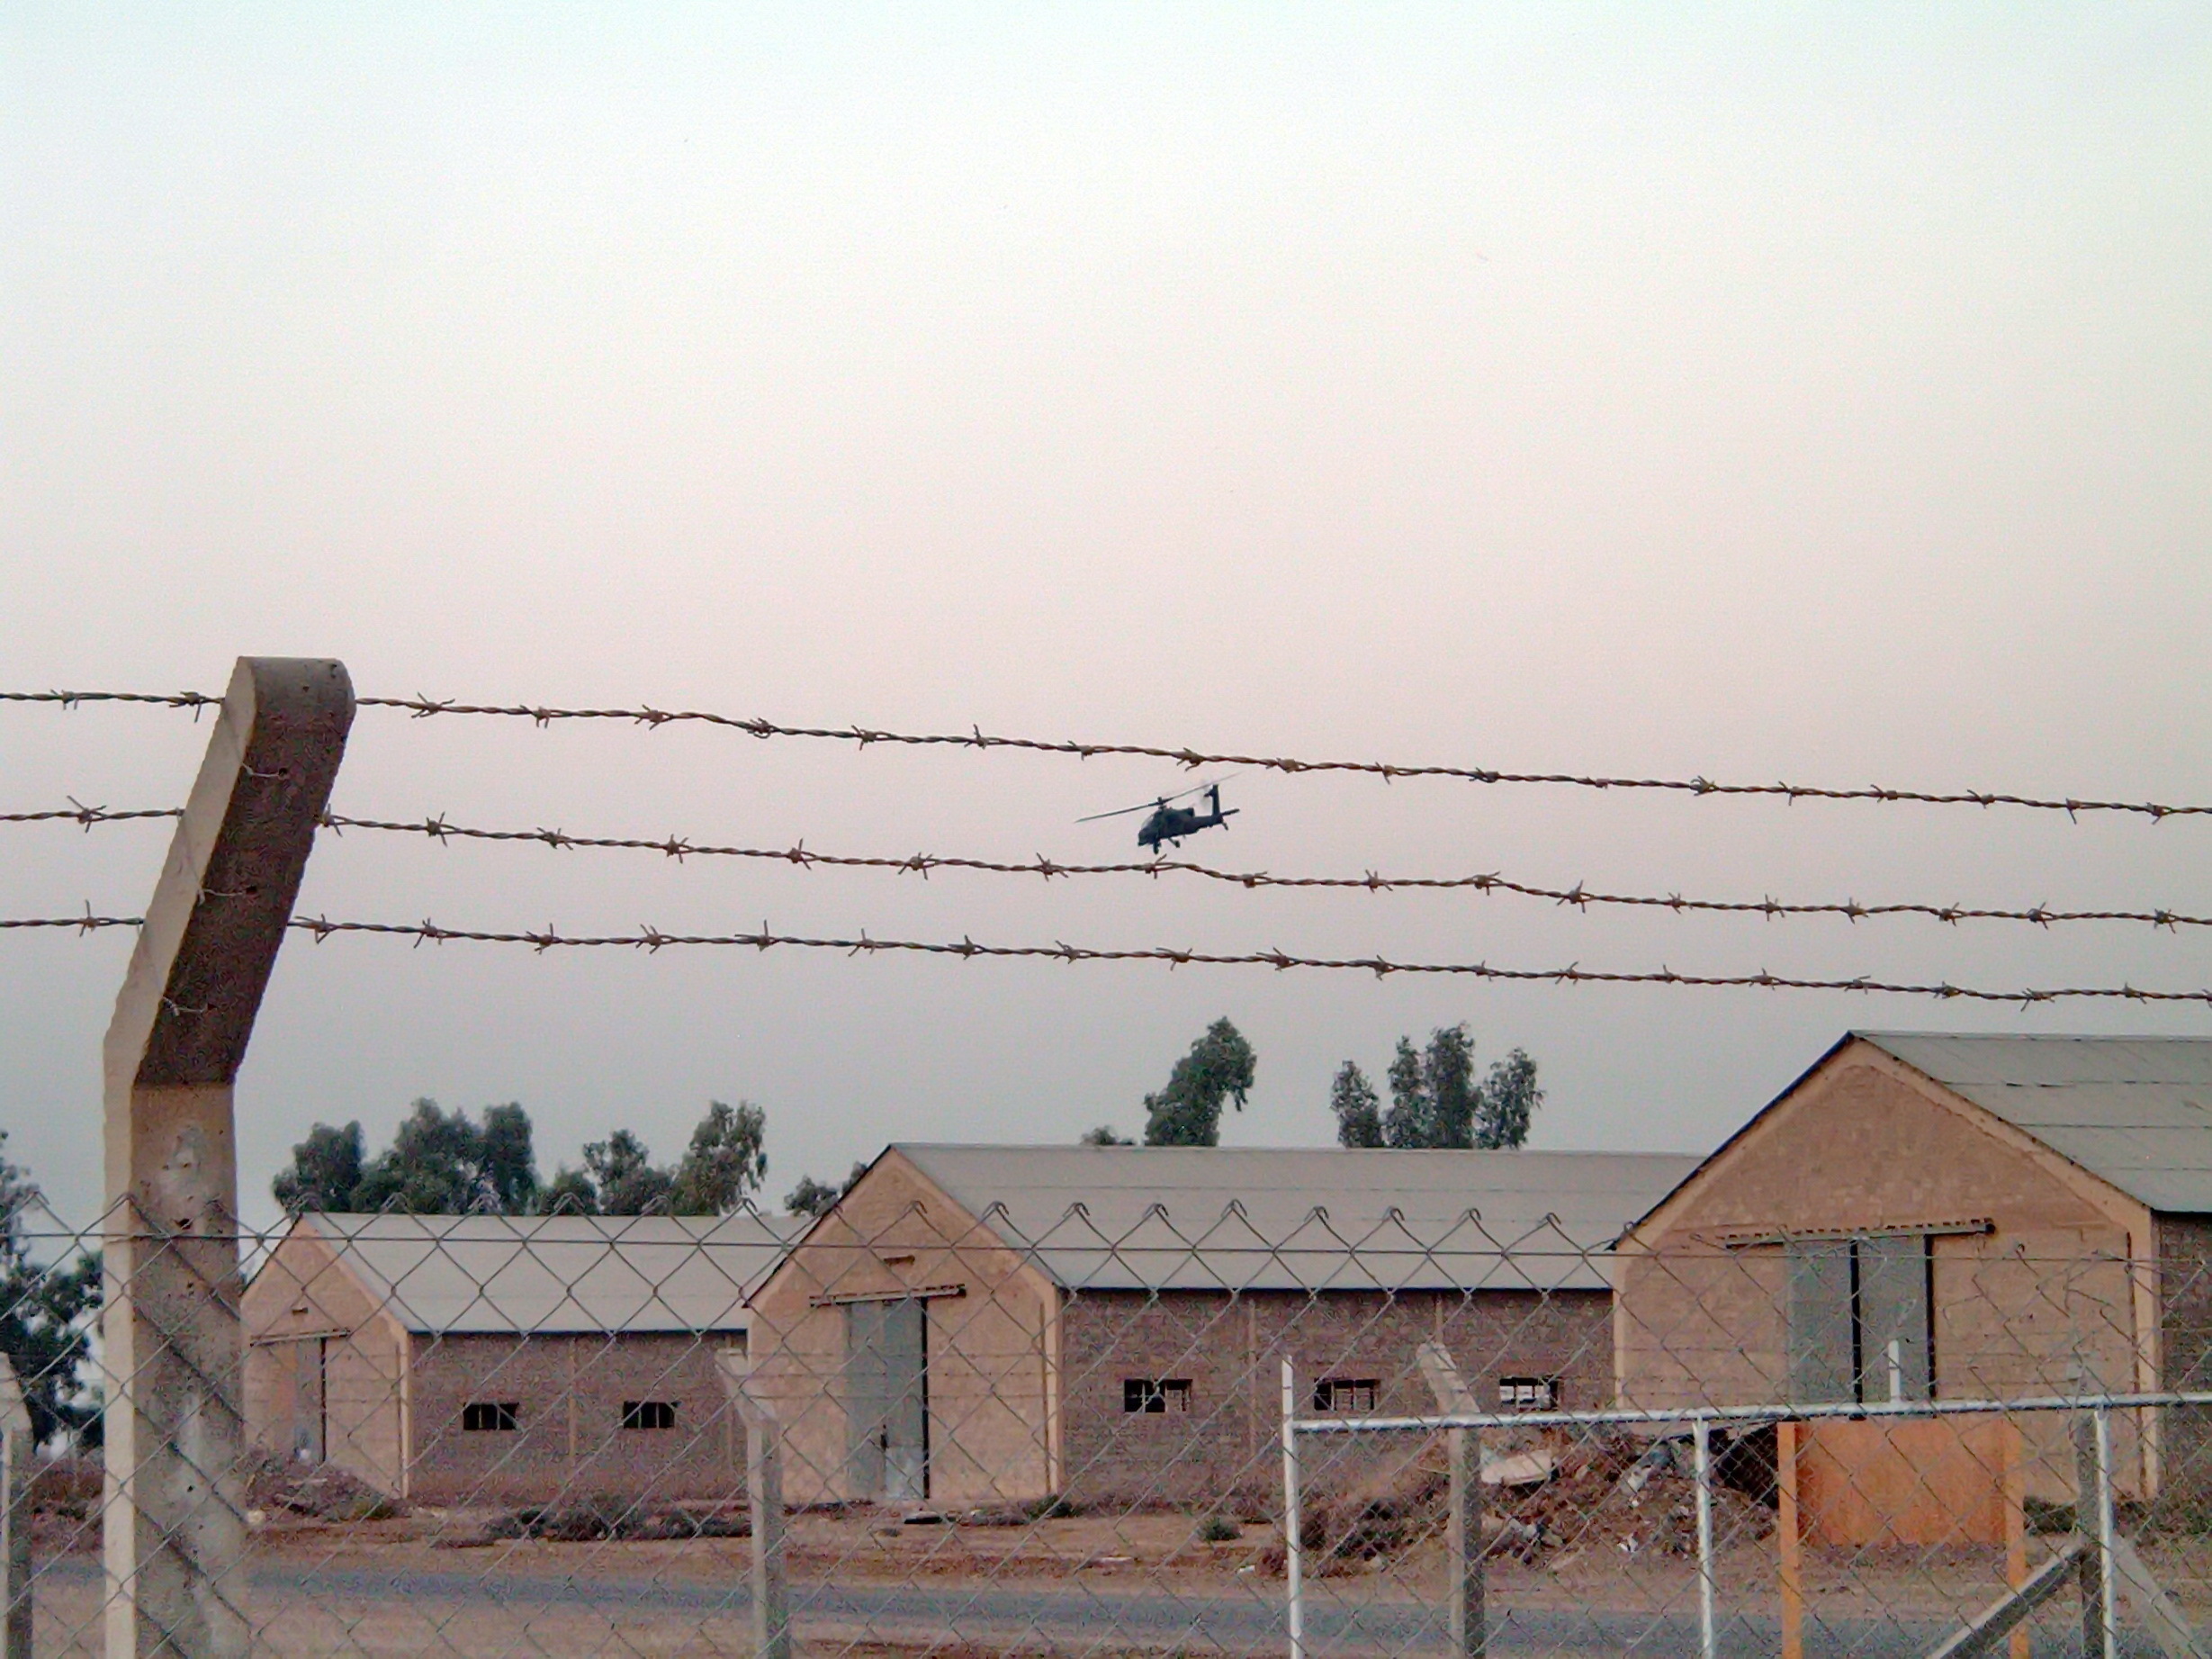 US Army helicopter flying above abandoned buildings at the end of a Forward Operating Base, framed by two strands of barbed wire